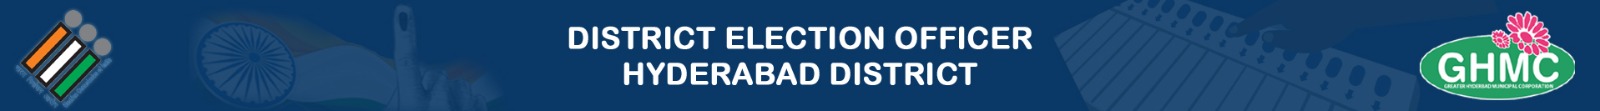 elections header